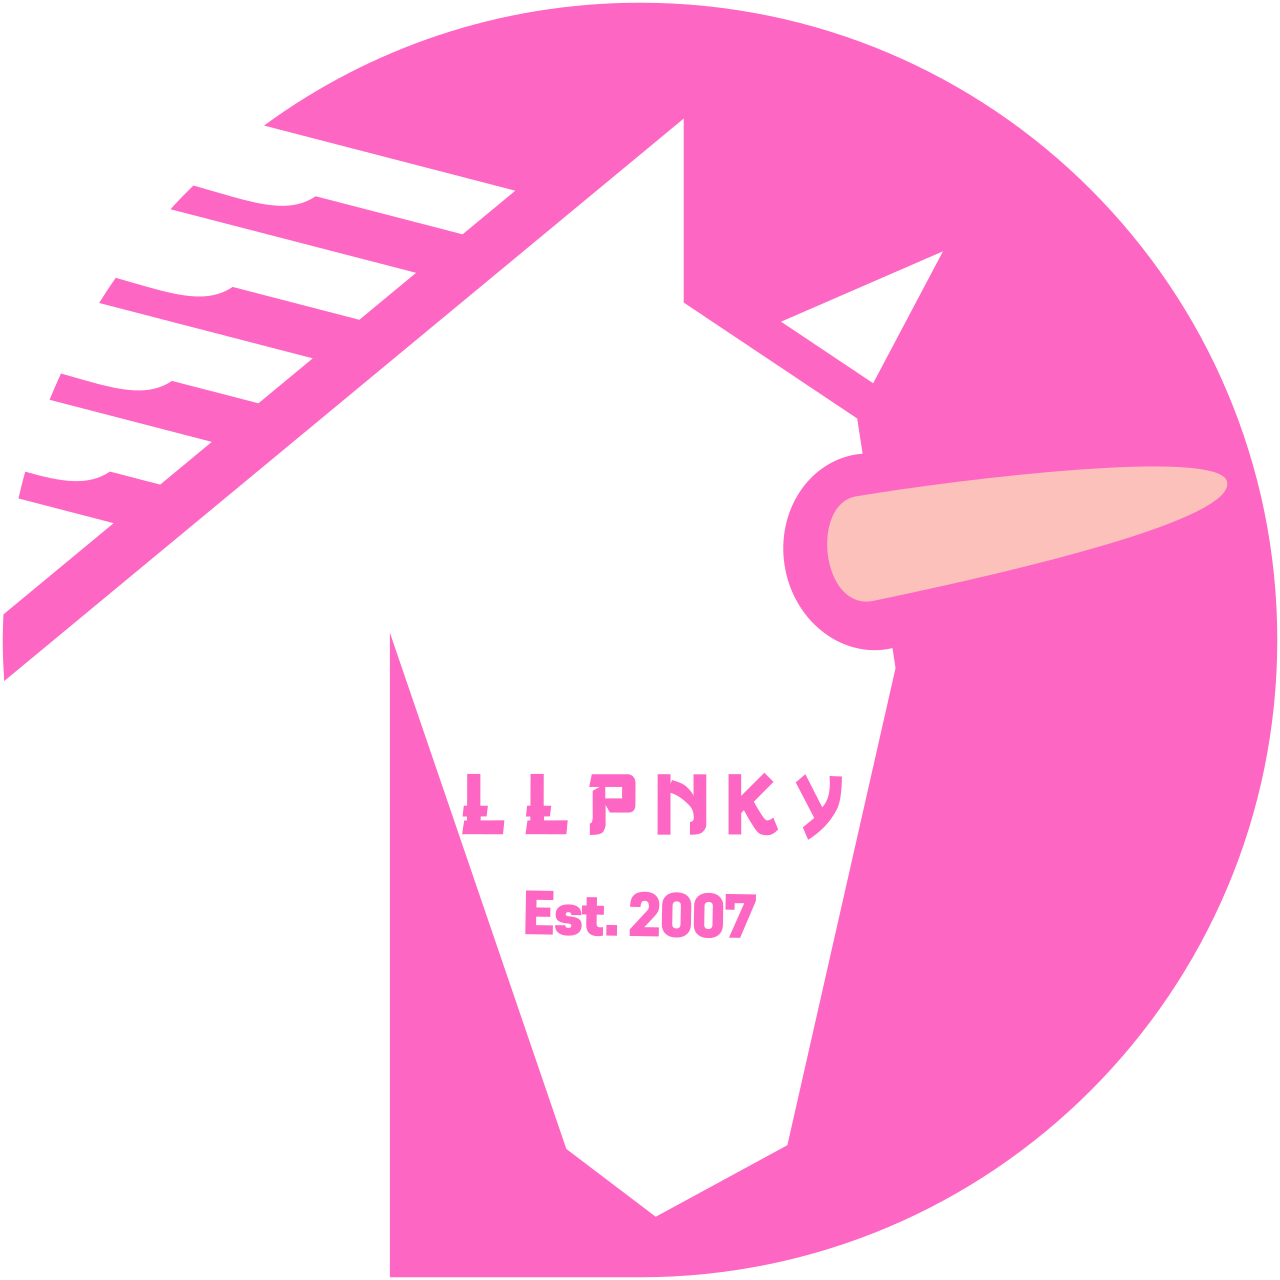 LLPNKY's web page